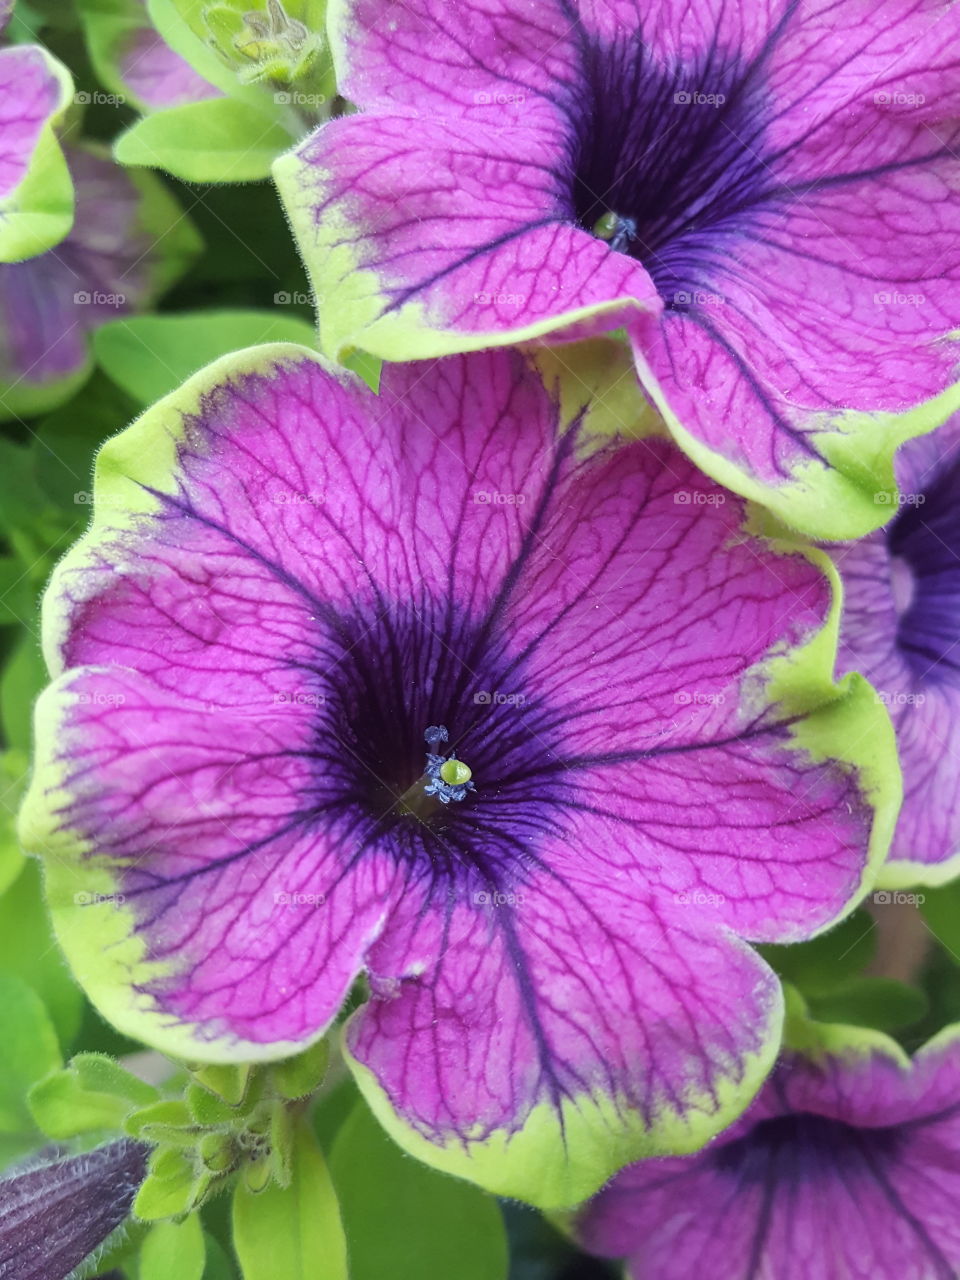 Lovely Petunia we had in our garden